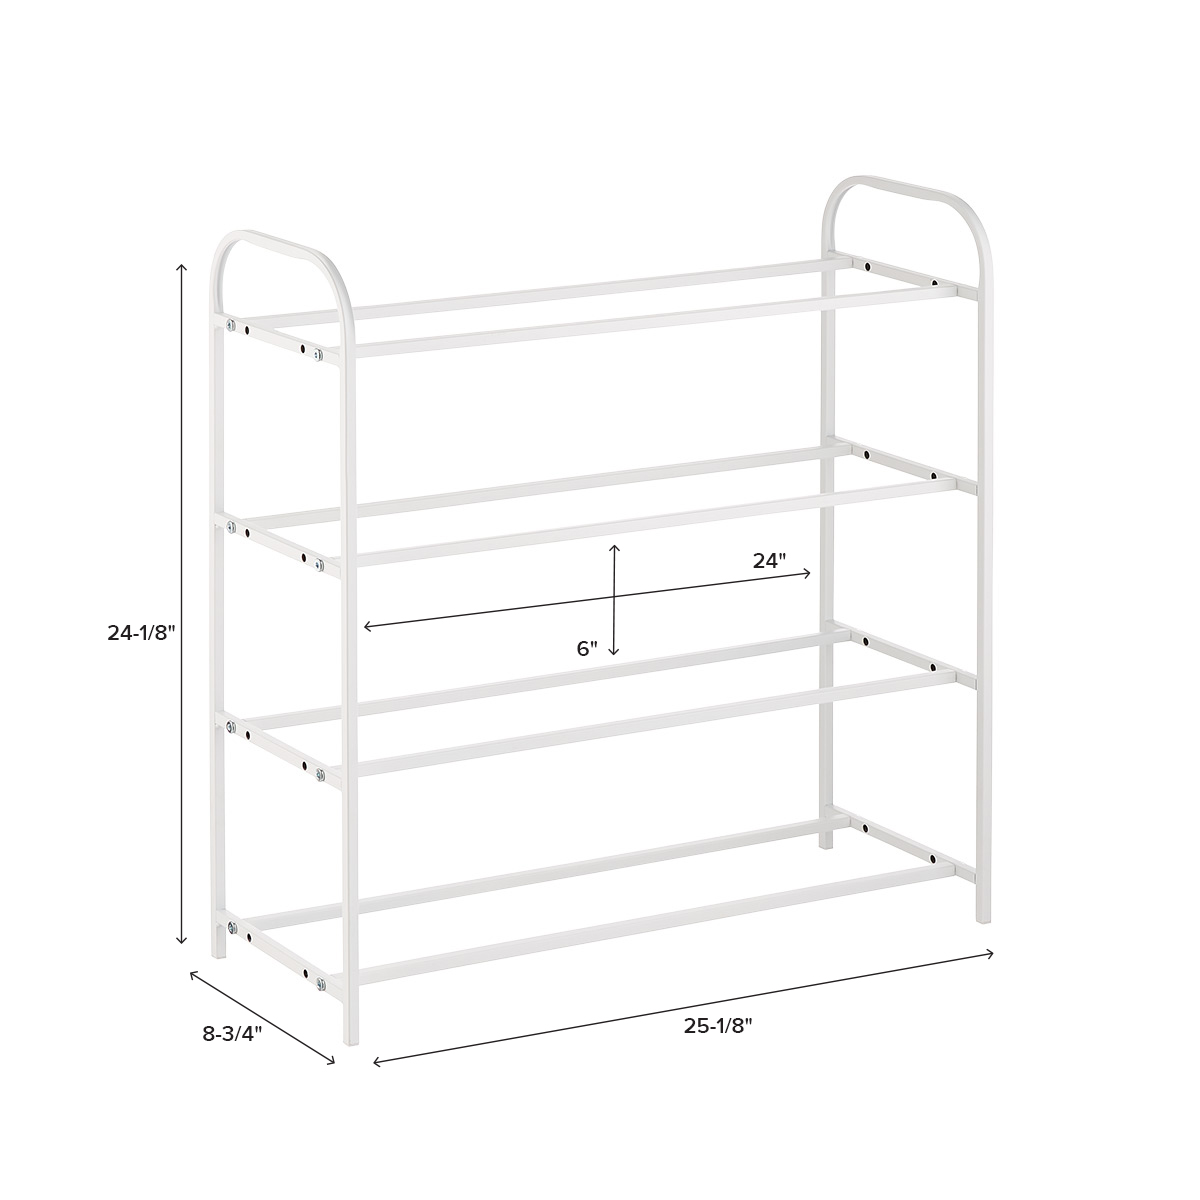 https://www.containerstore.com/catalogimages/447715/10080935-white-4-tier-shoe-rack-with.jpg